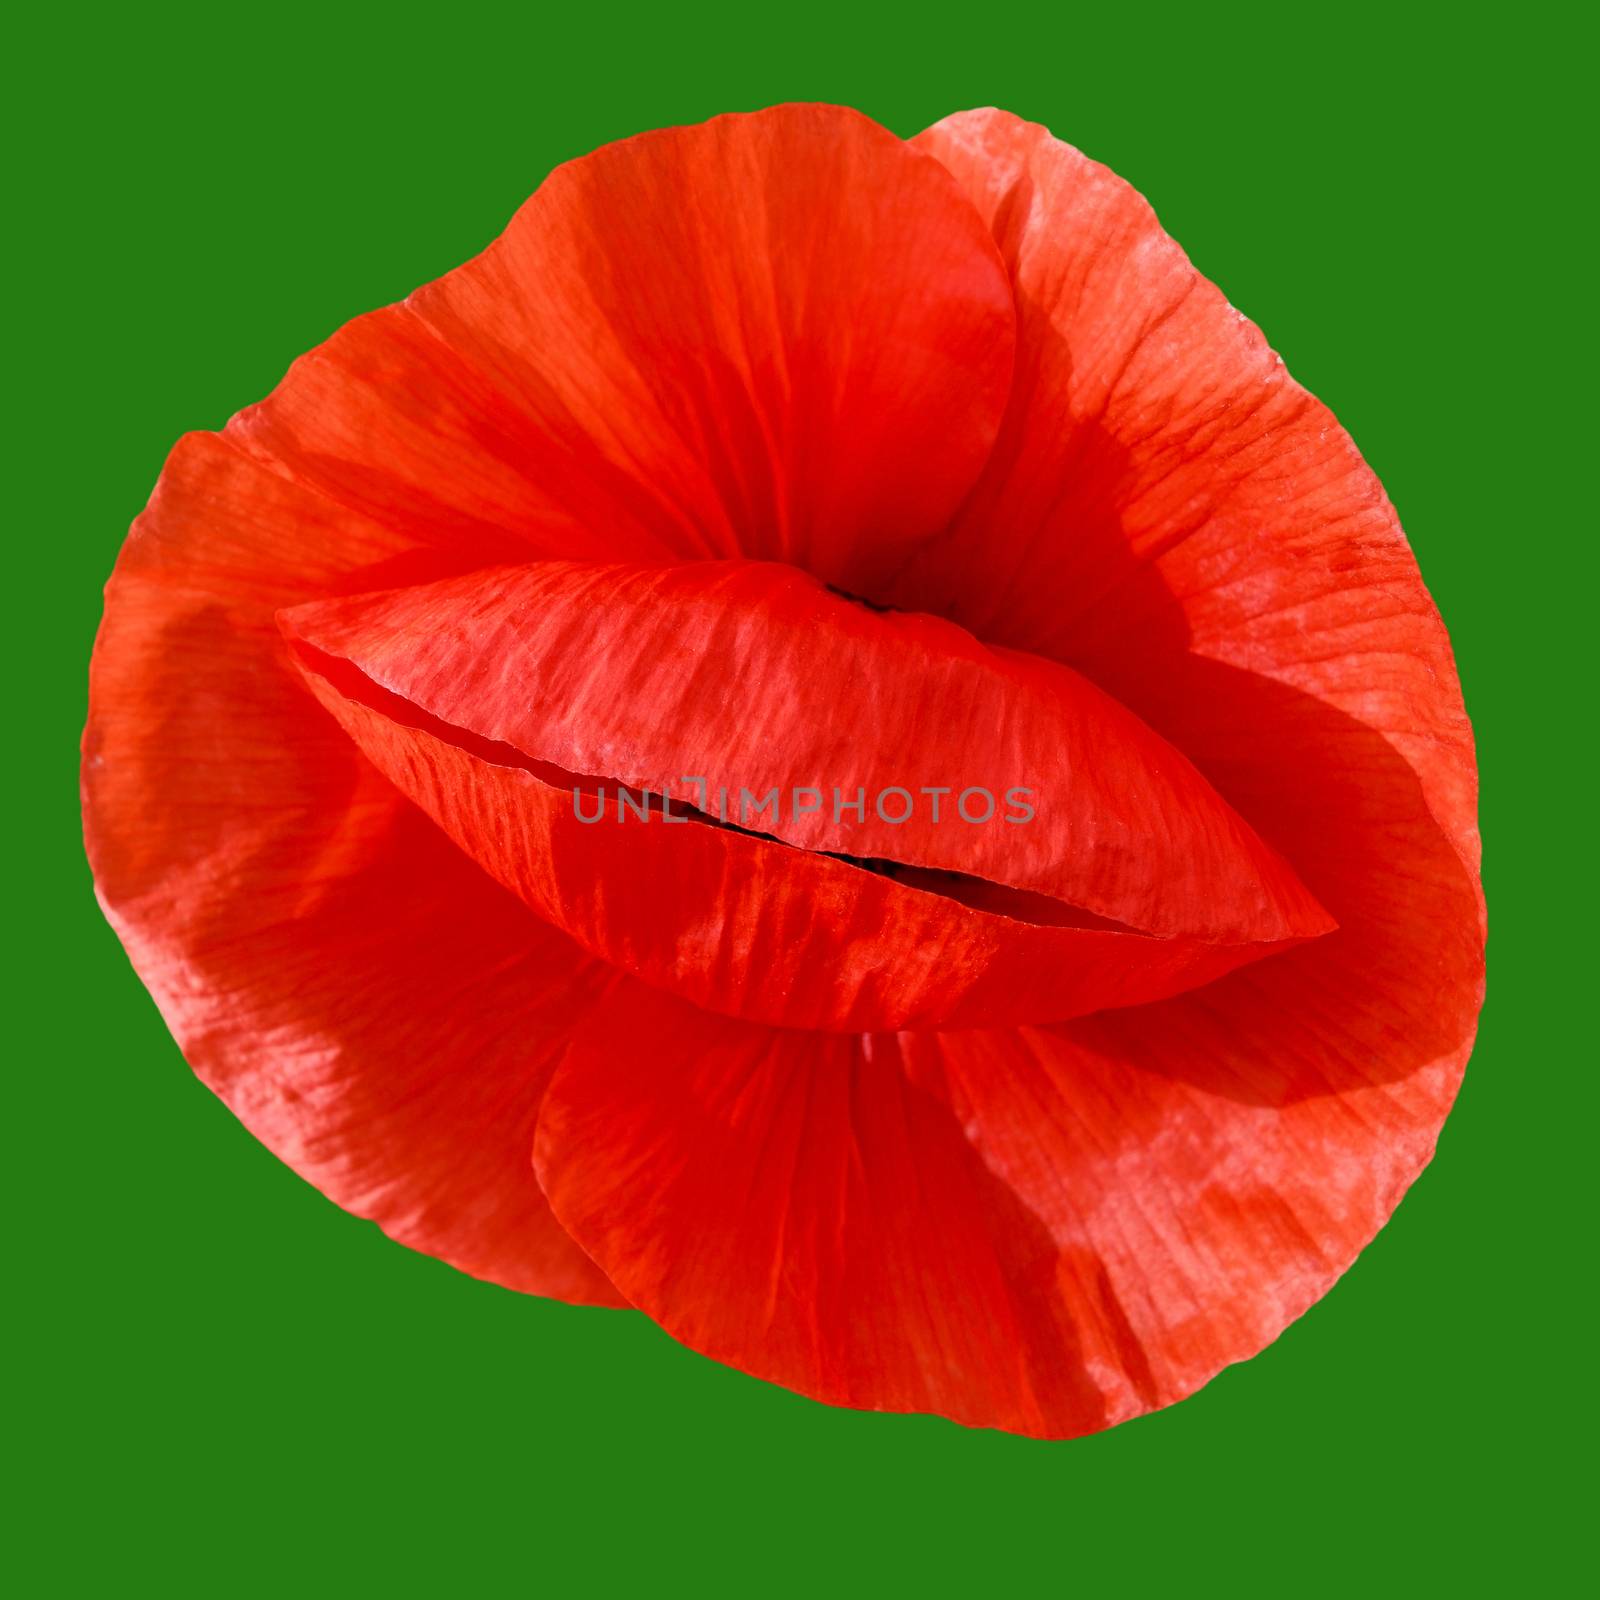 A red poppy flower on a green background close-up. View from above